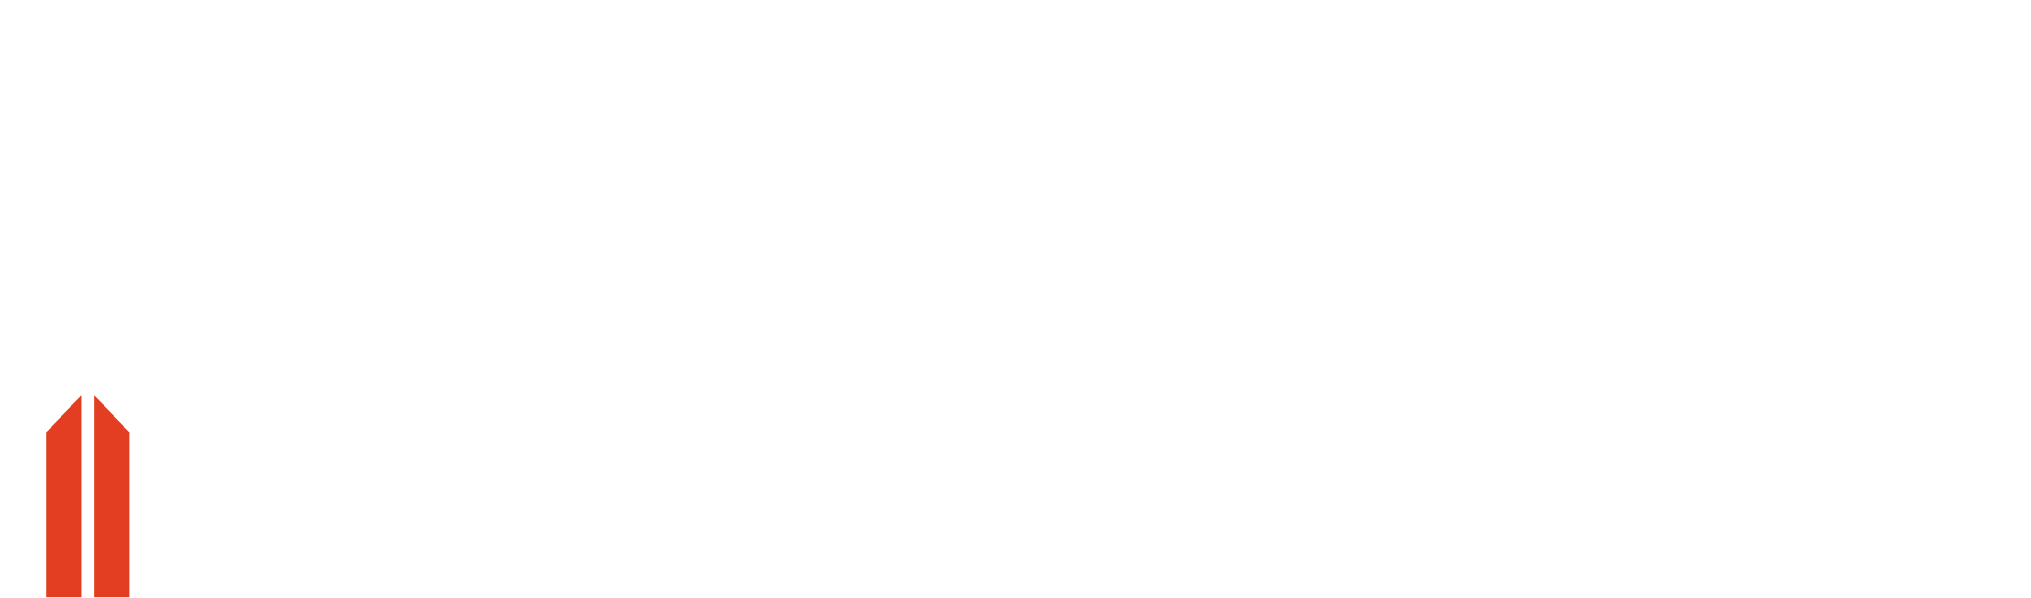 Stirling Infrastructure Partners